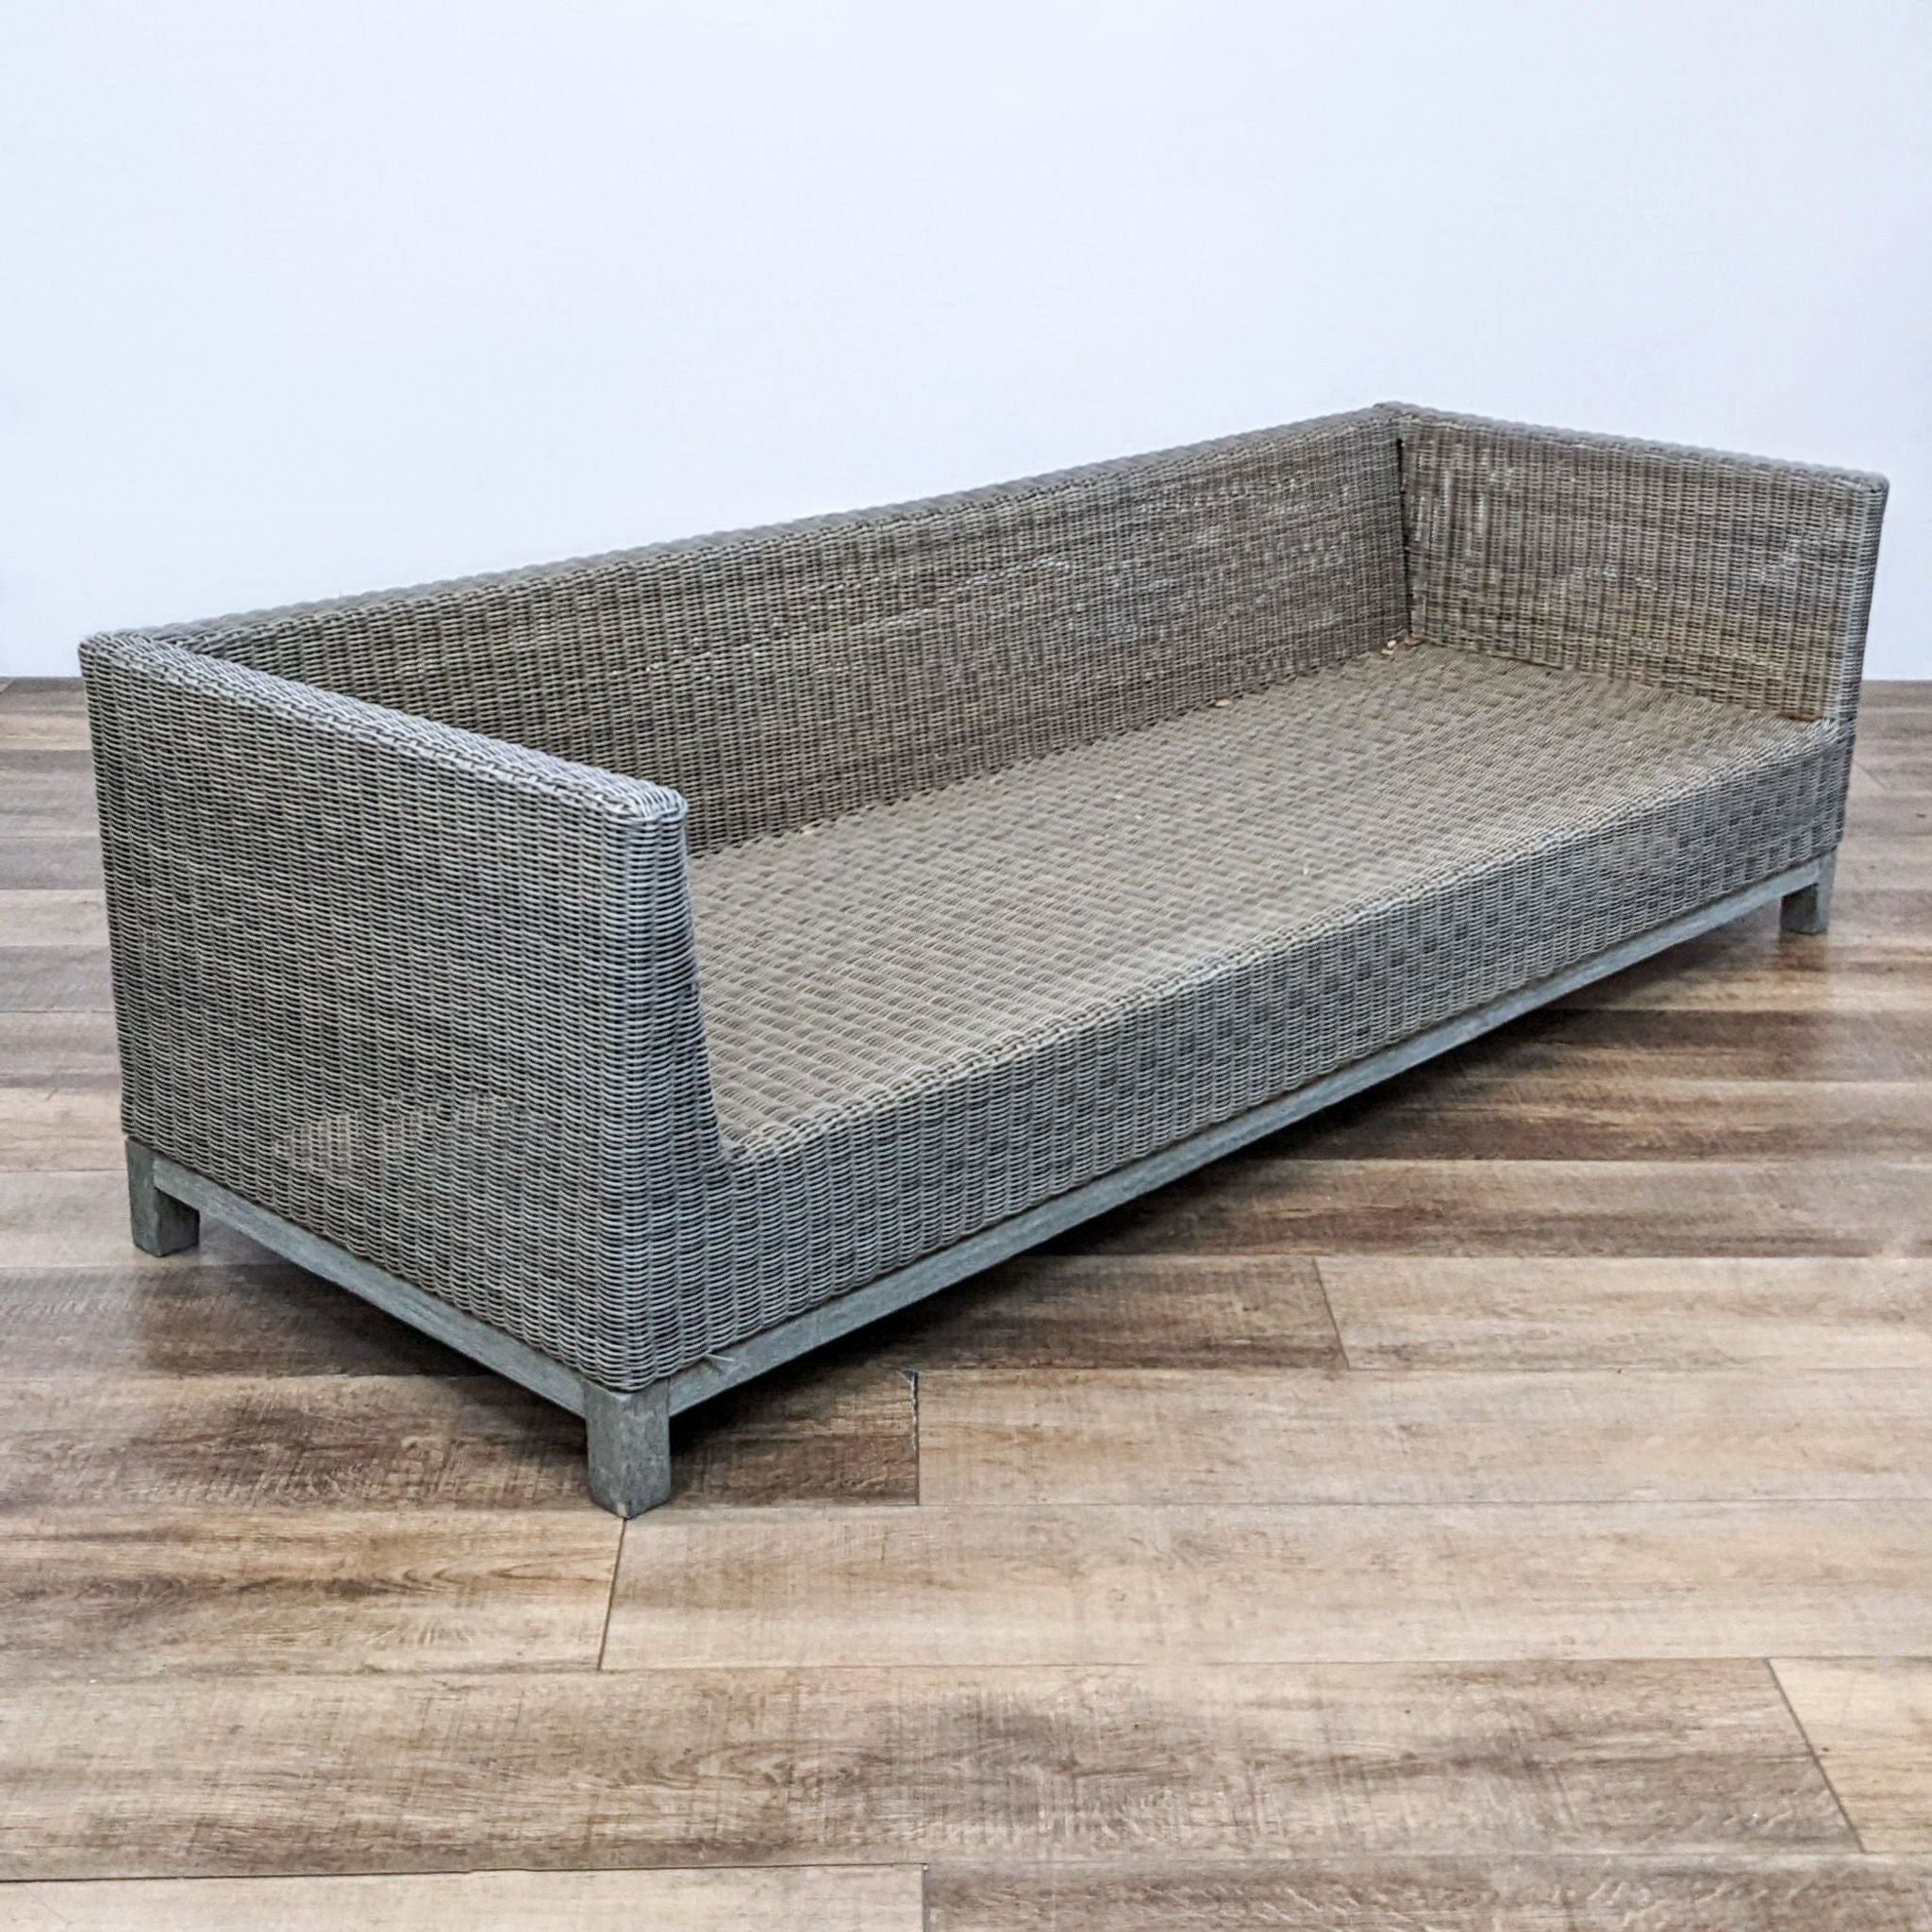 Outdoor 7-foot sofa with a gray resin wicker finish and sturdy wooden frame, designed by Restoration Hardware.